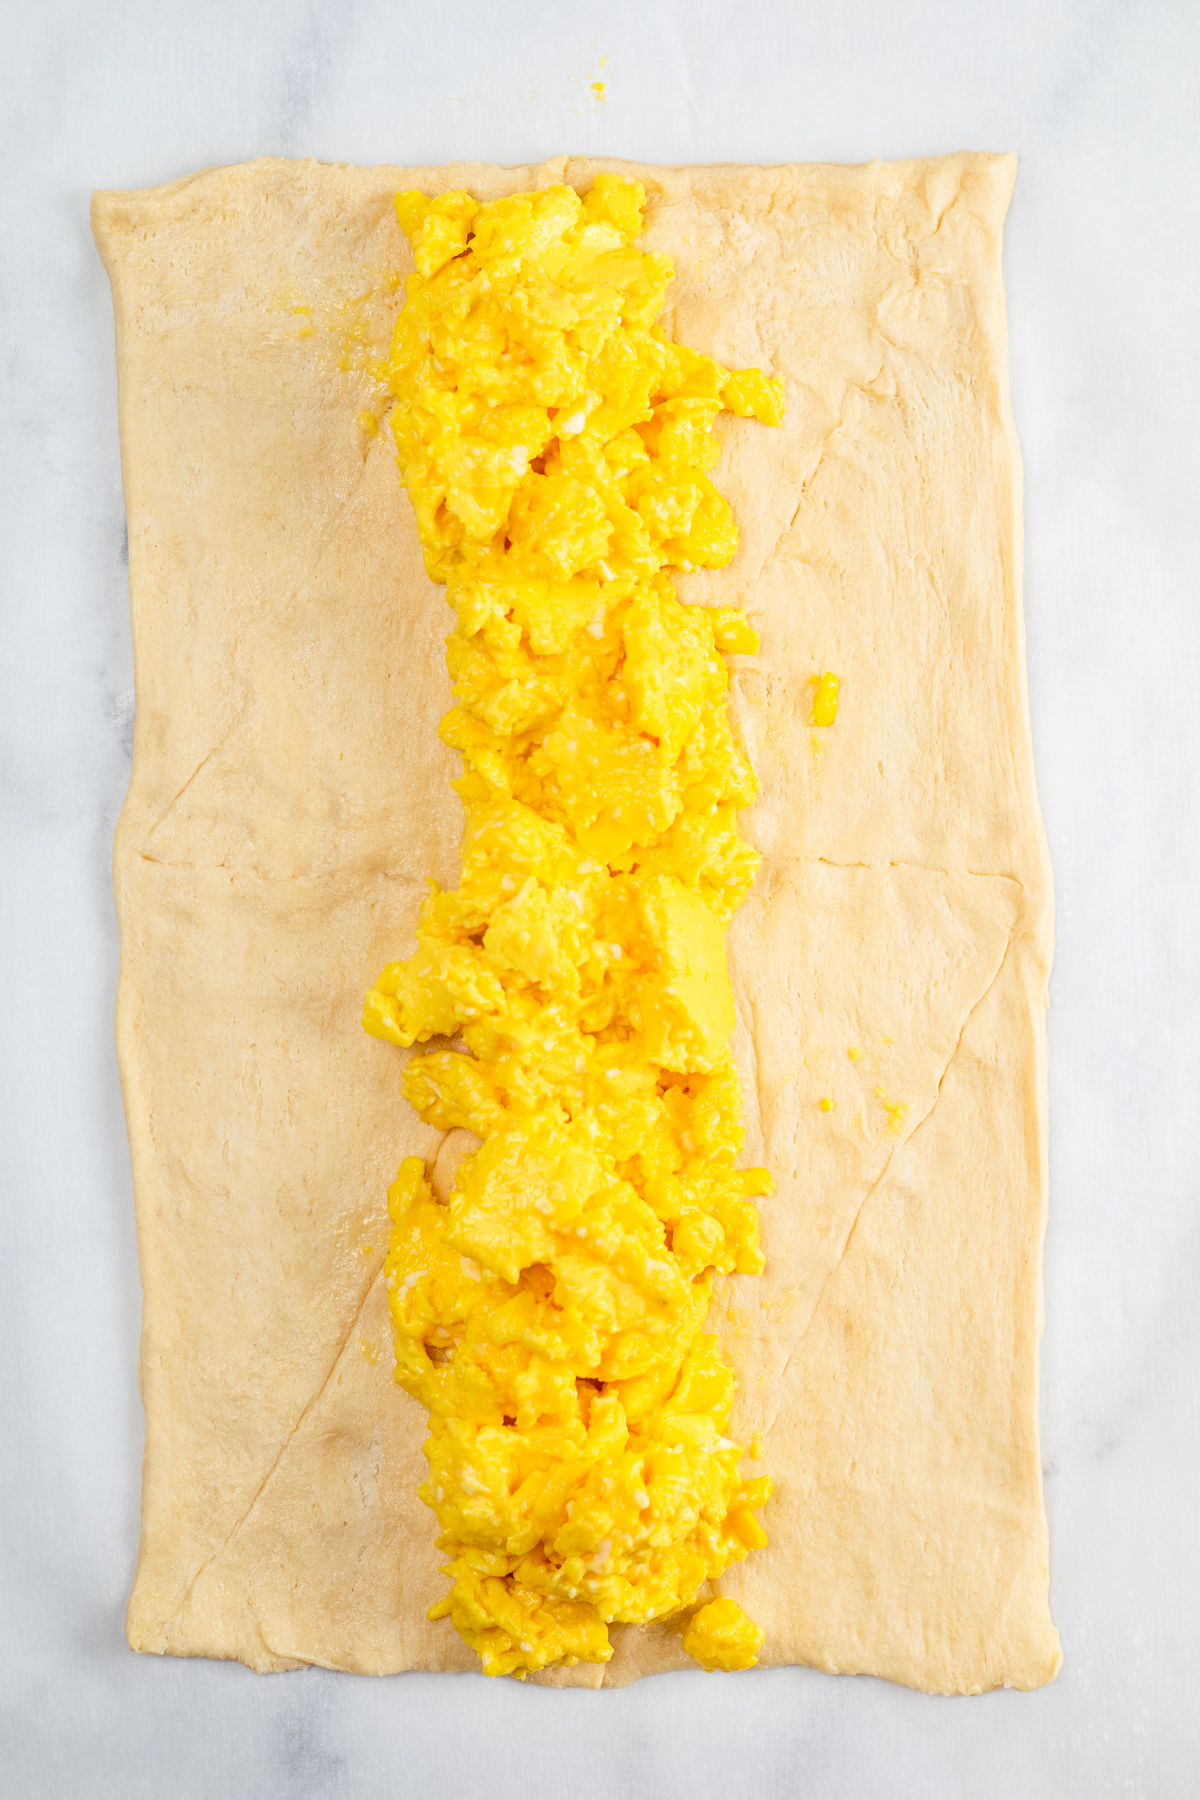 Scrambled eggs layered down the center of a sheet of crescent dough.